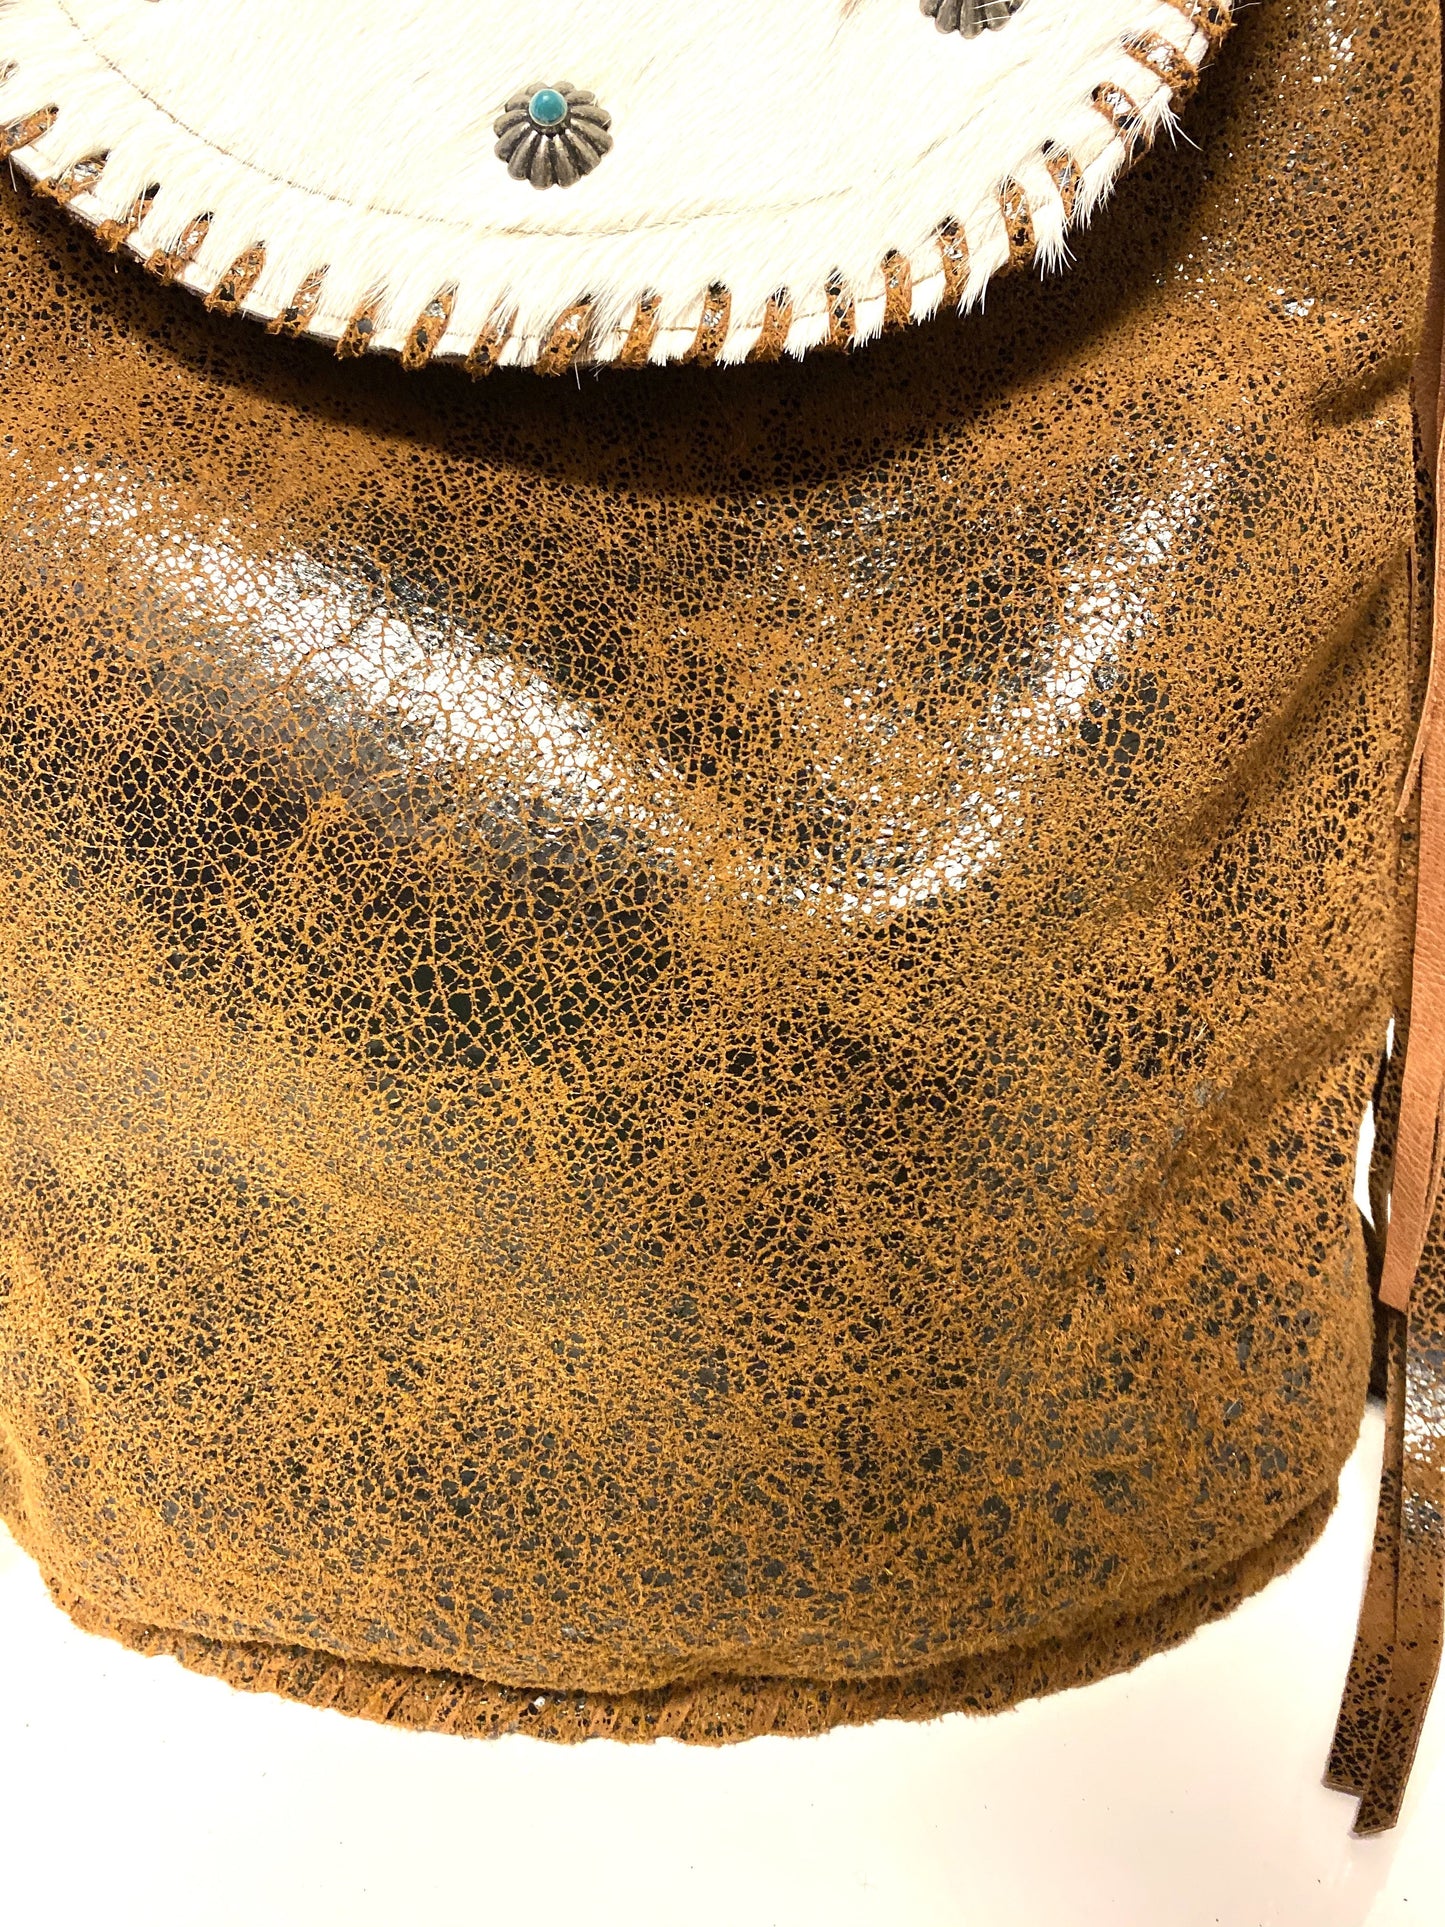 PS002-1 Yahil Ferry Signature BABY ROXXY Leather Cowhide Back Pack Purse